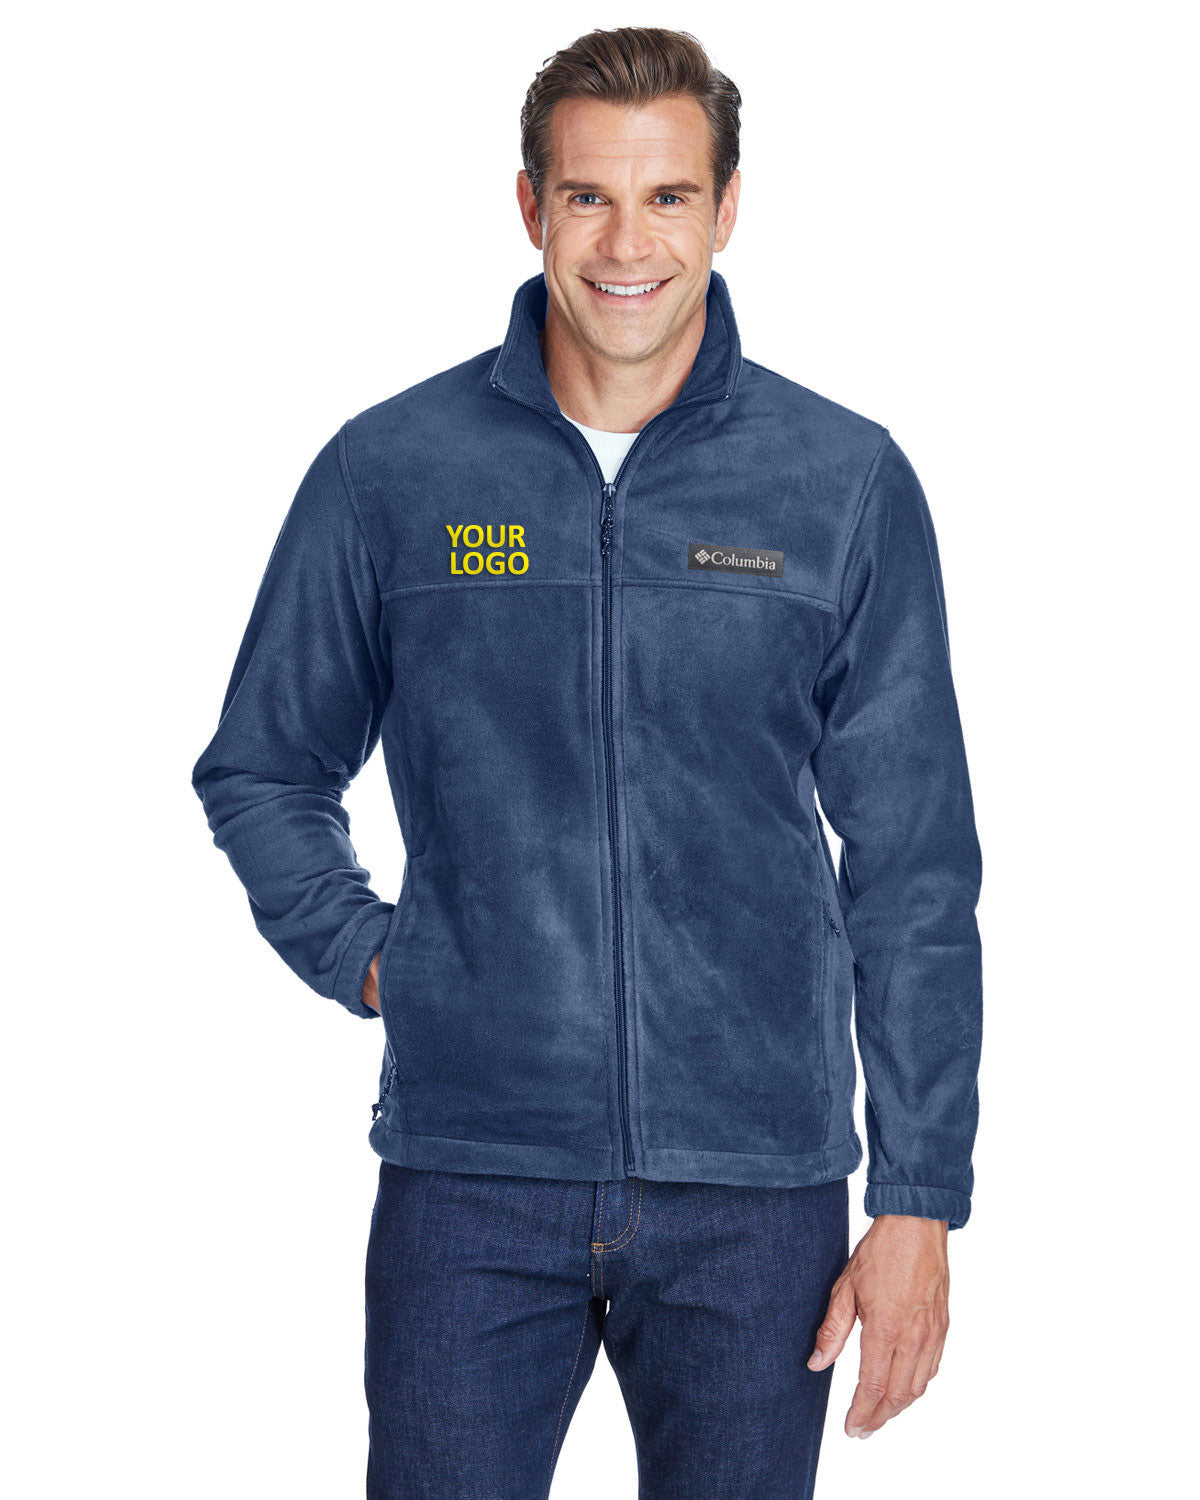 Columbia Collegiate Navy 3220 embroidered jackets for business